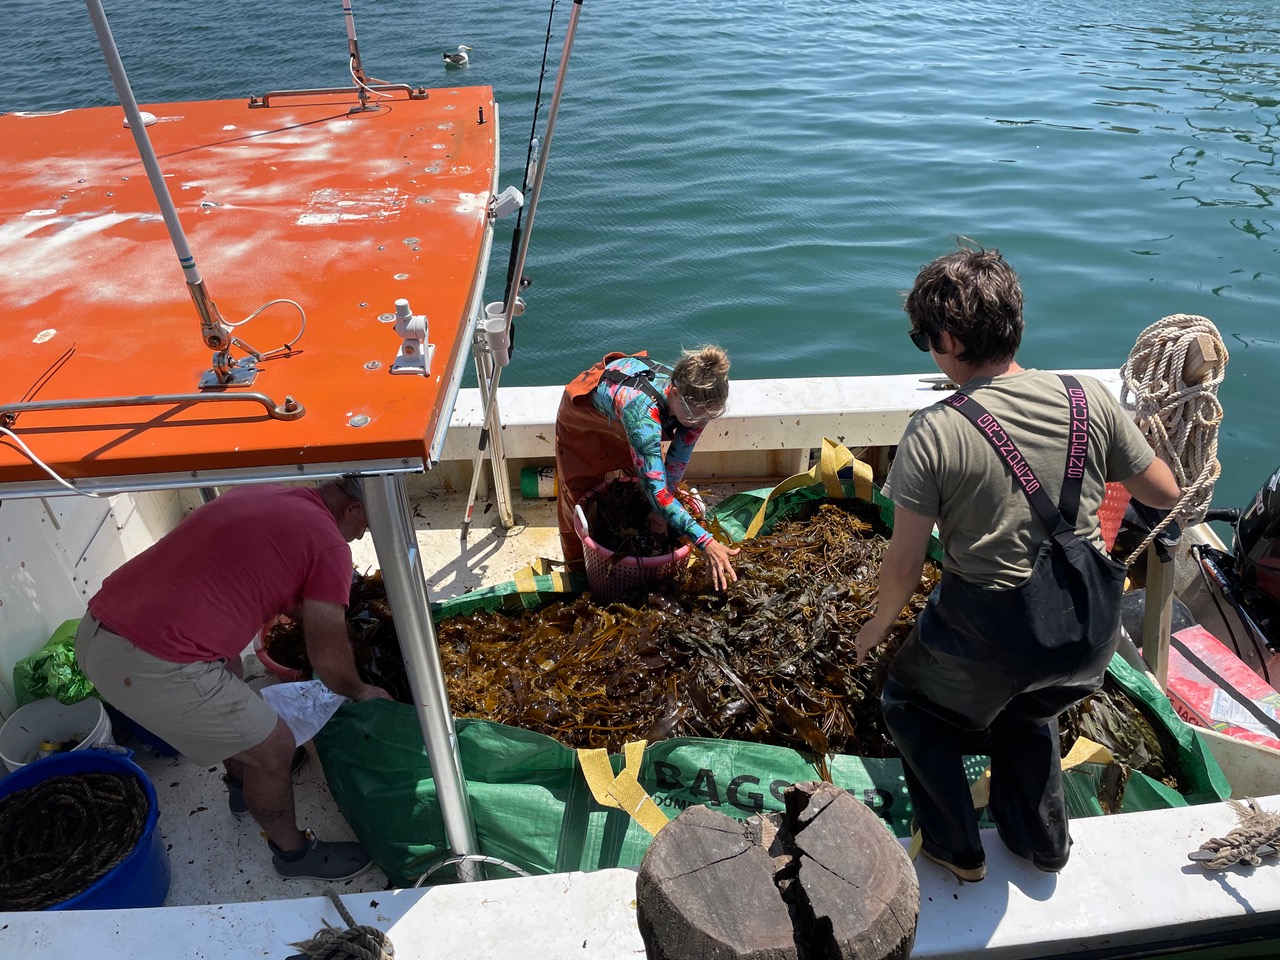 The Montauk Seaweed Supply Co. took delivery of 792 pounds of kelp from Suzie Flores, a Connecticut kelp farmer and her assistant and deckhand, Elizabeth Ellenwood (pictured), last month. Montauk Seafood Supply, which grew out of Dock to Dish, a fresh seafood delivery service, will convert the kelp to fertilizer.